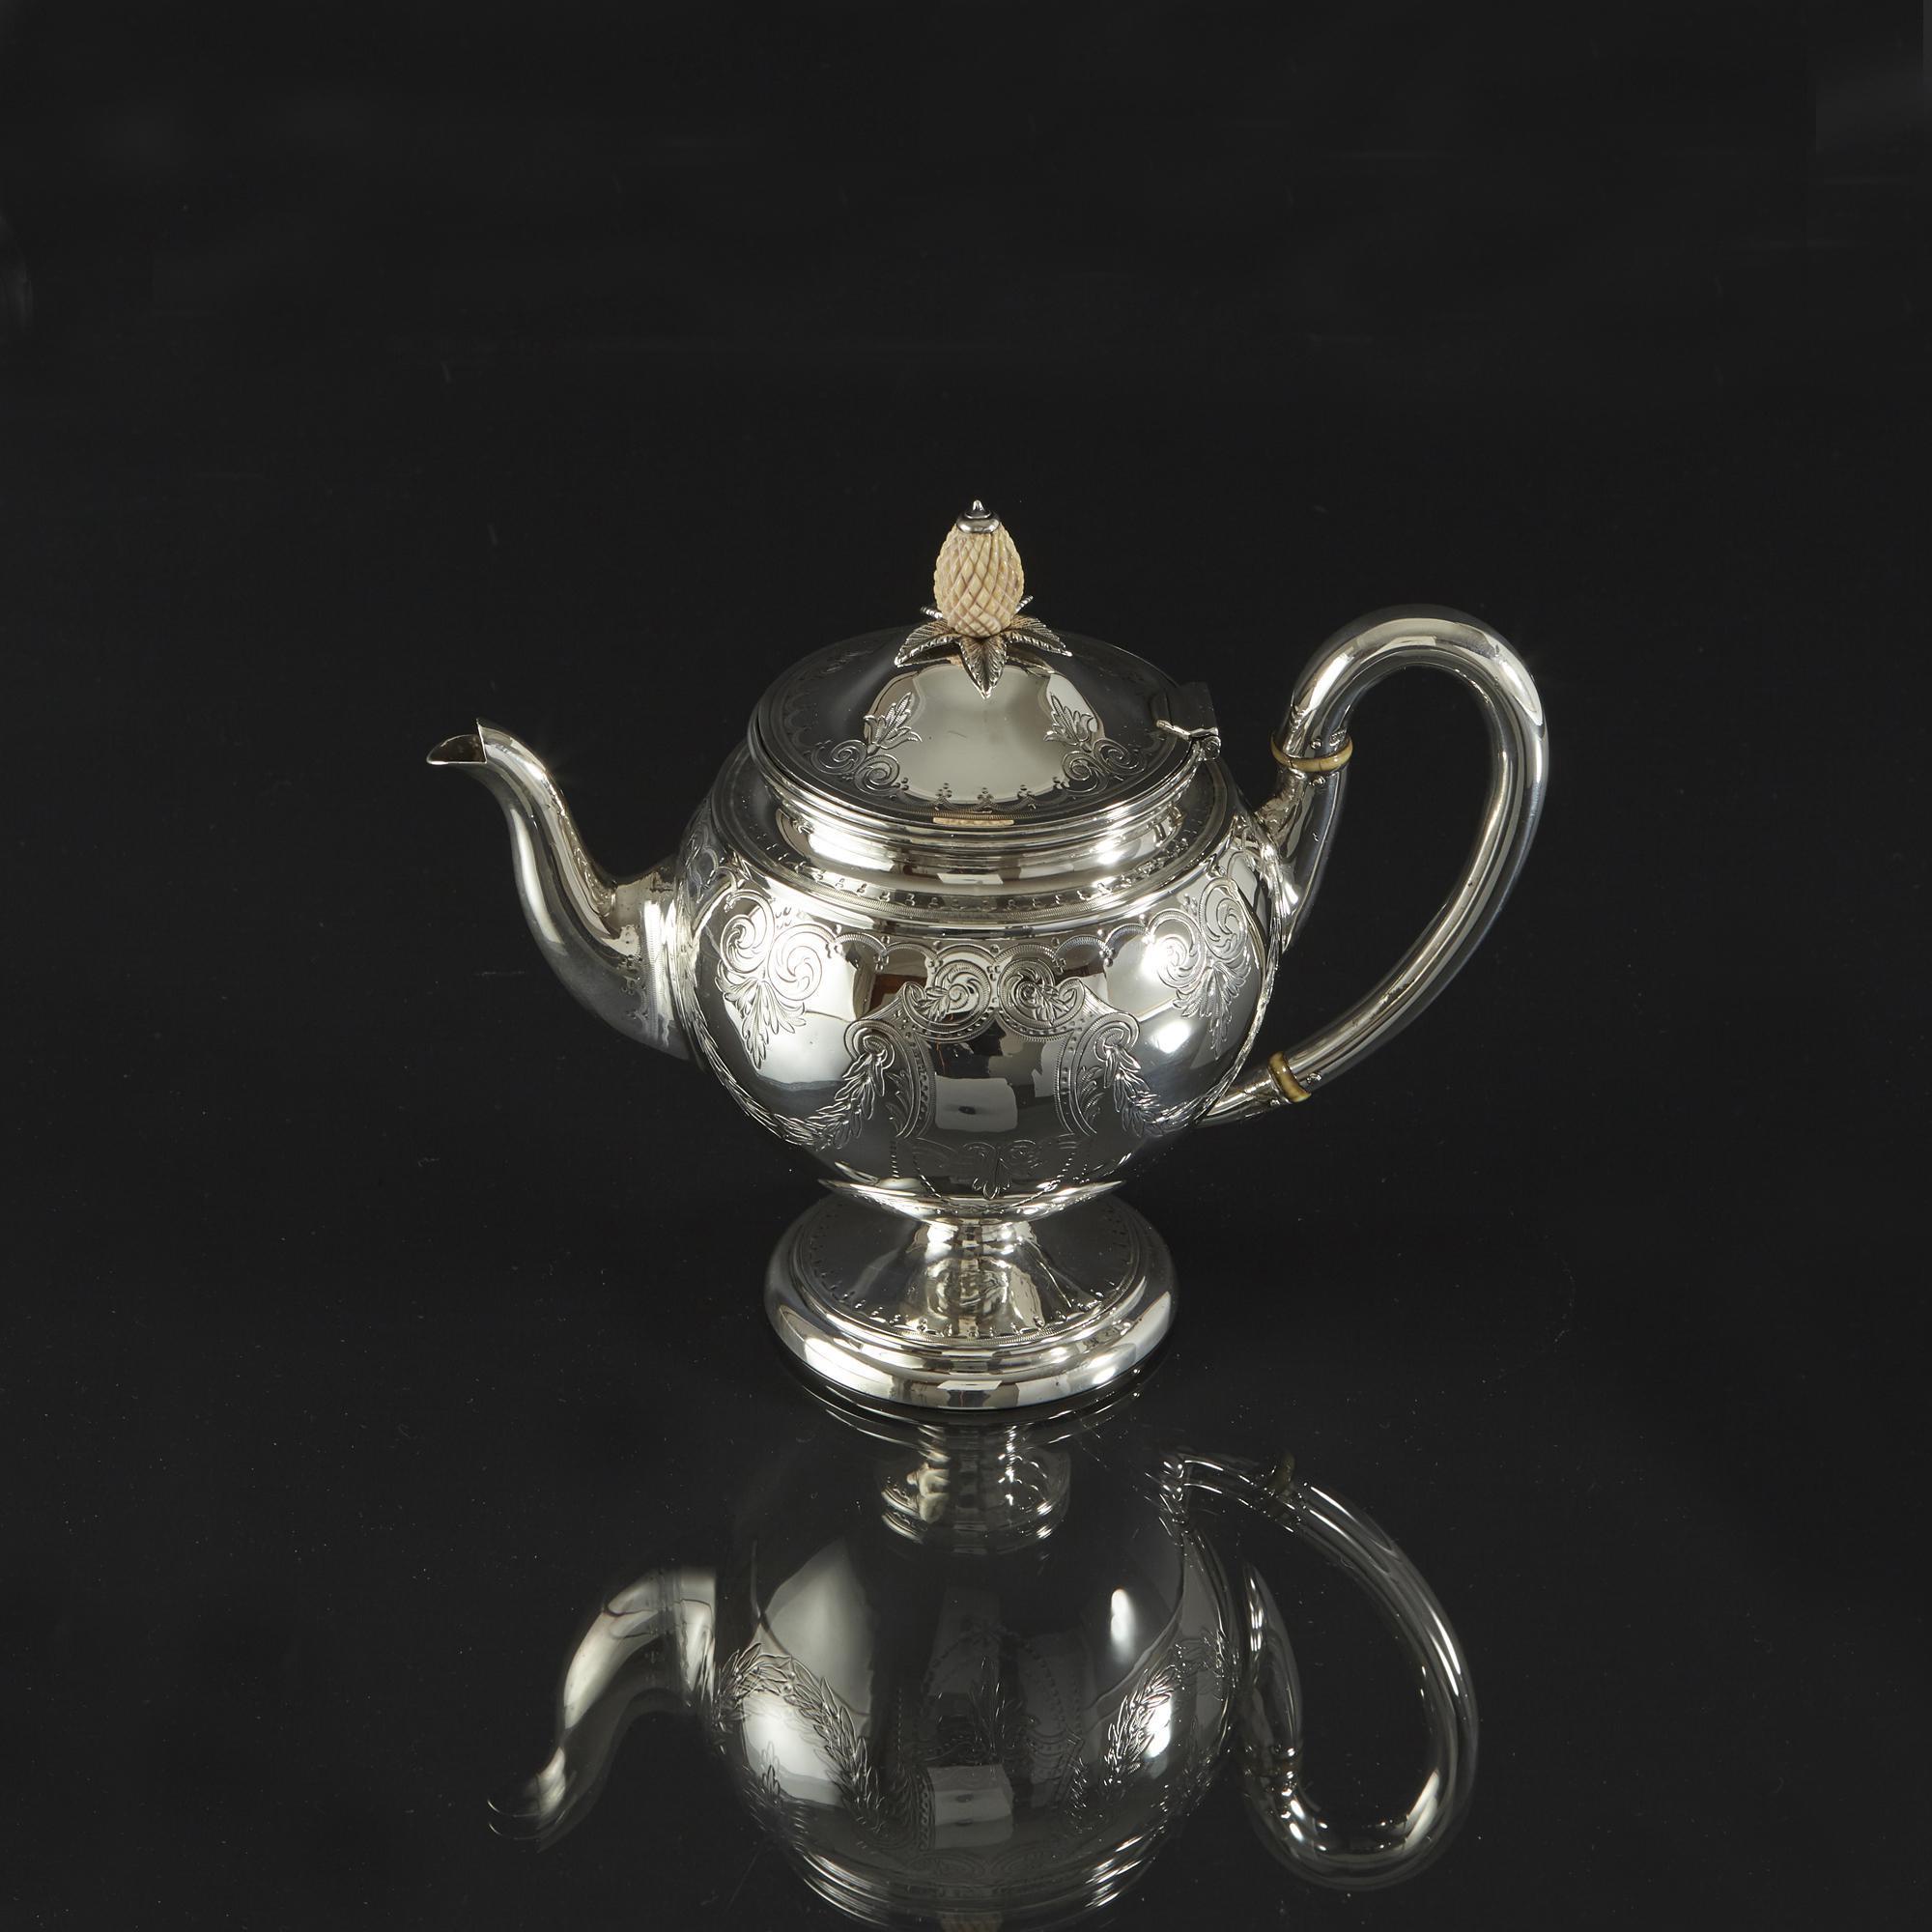 This is a pretty bachelor or breakfast teapot with fine crisp hand-engraved decoration of scrolls, leaves and garlands. The round body is mounted on a circular spreading foot and has a slightly domes hinged lid with matching engraving. It has a